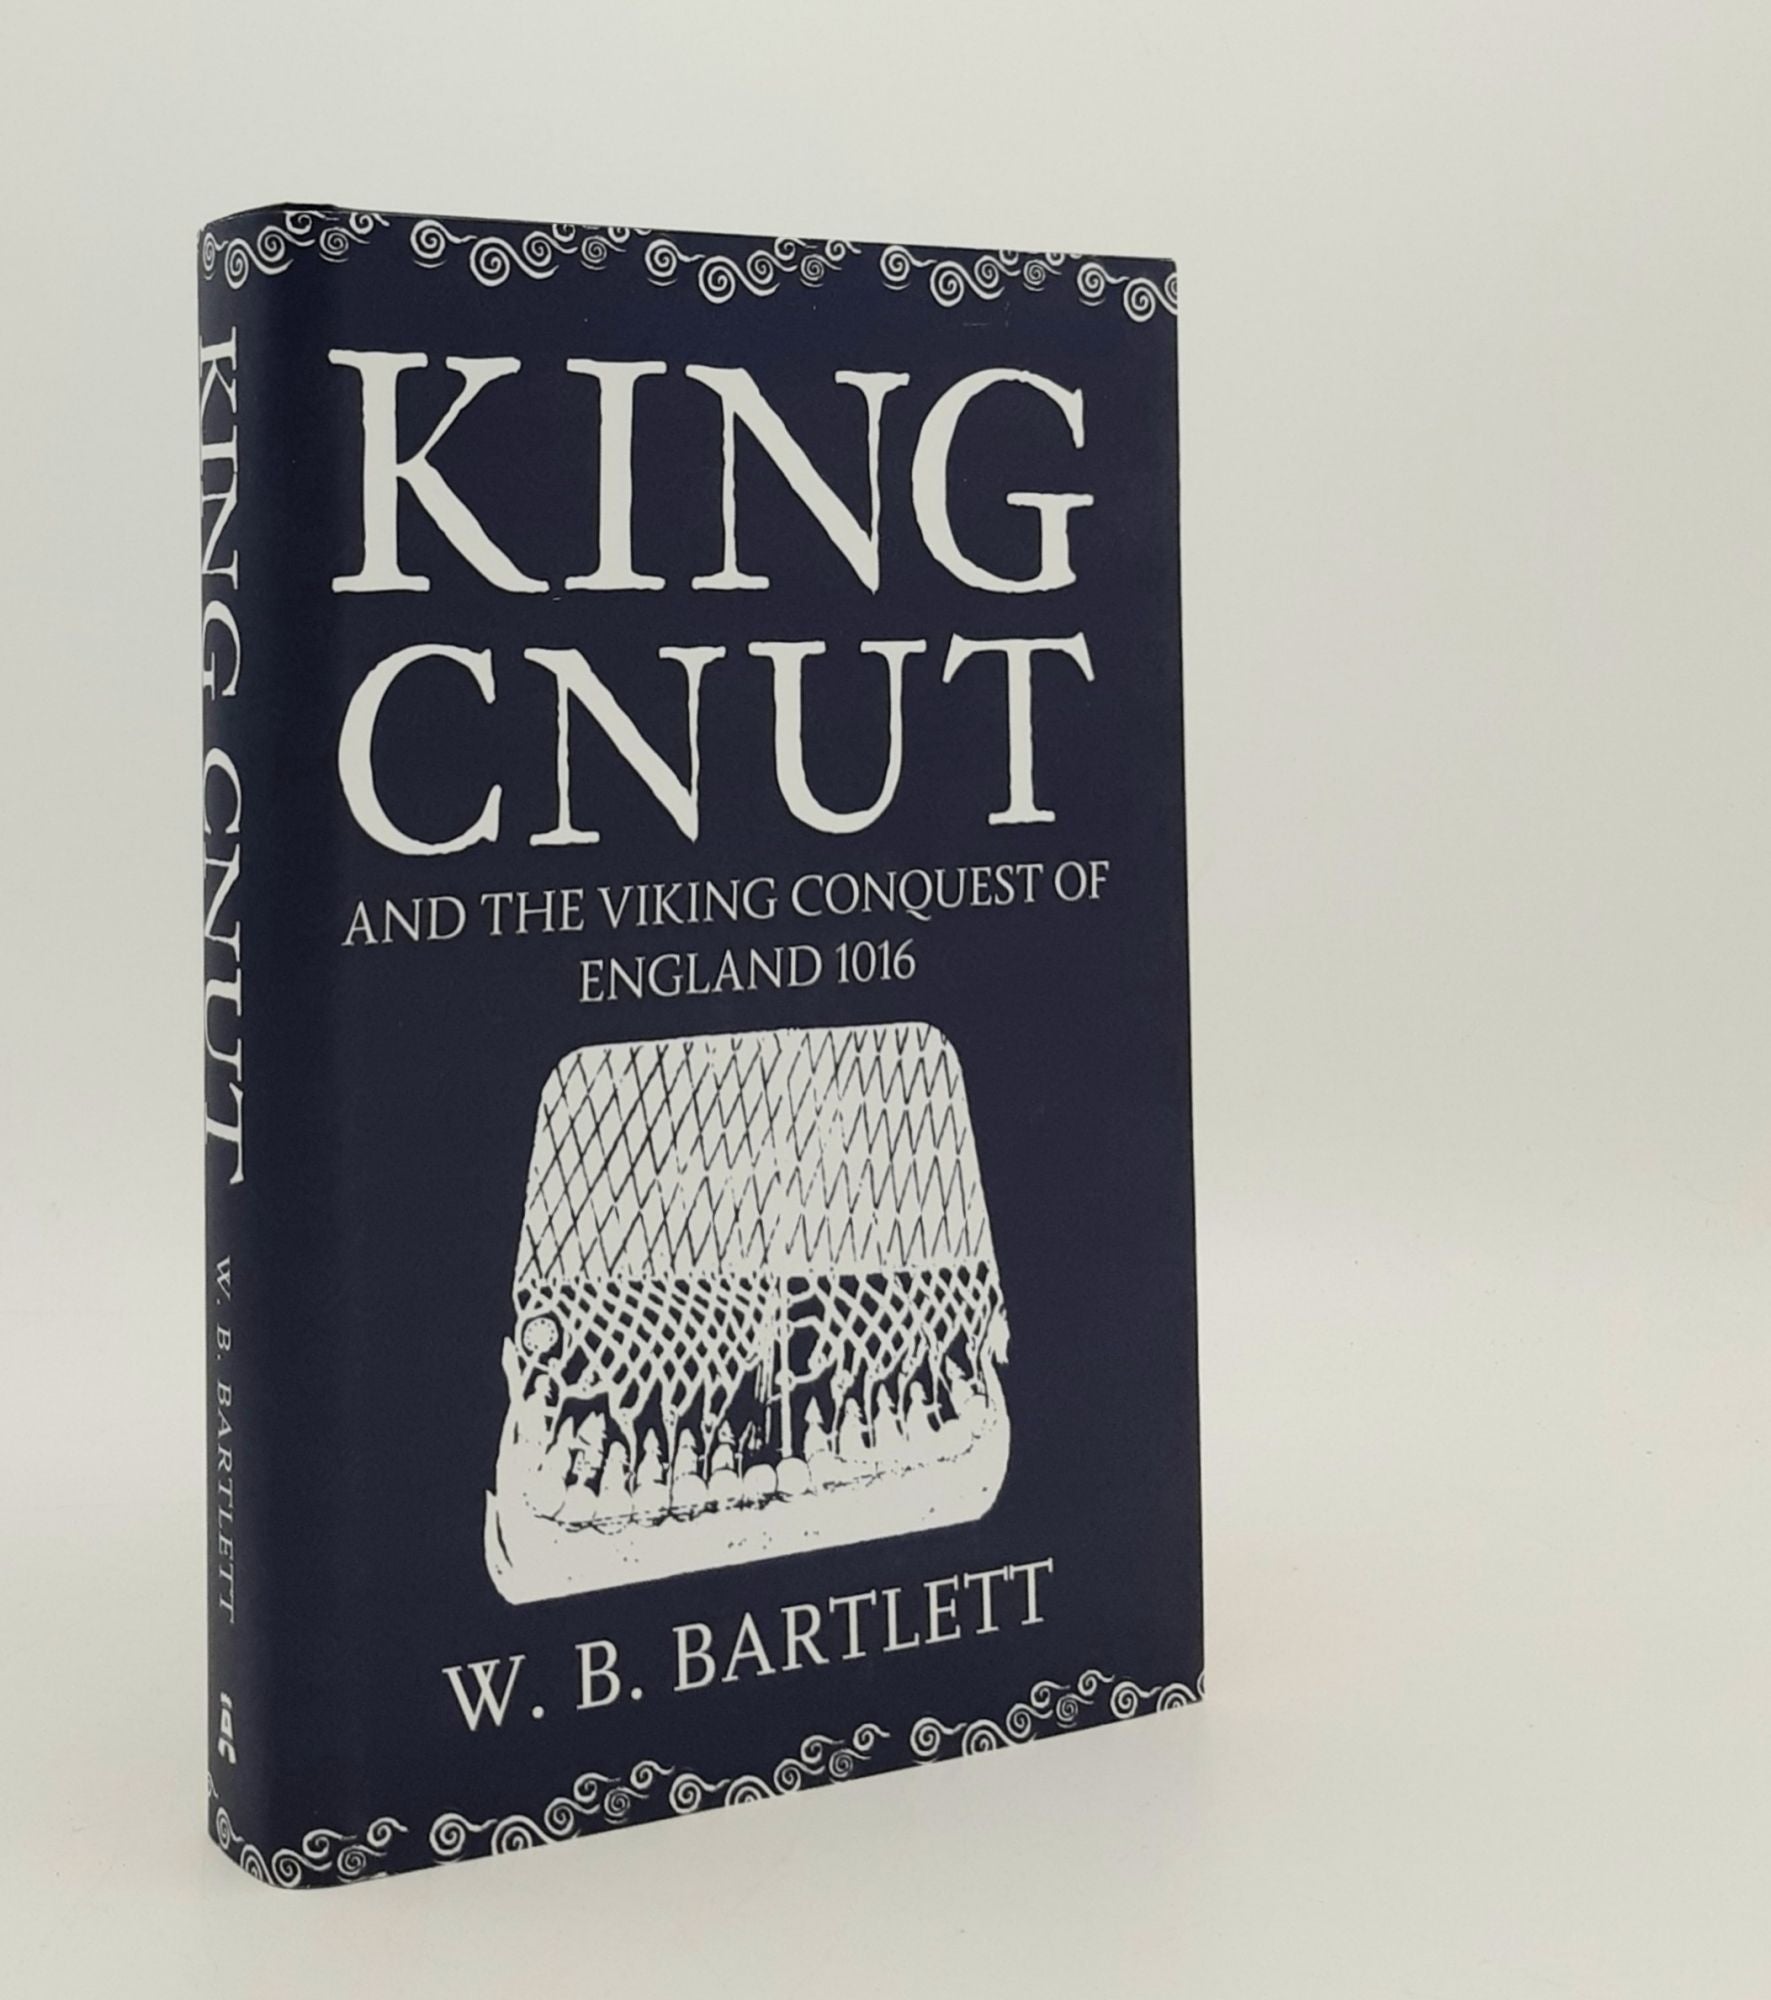 BARTLETT W.B. - King Cnut and the Viking Conquest of England 1016